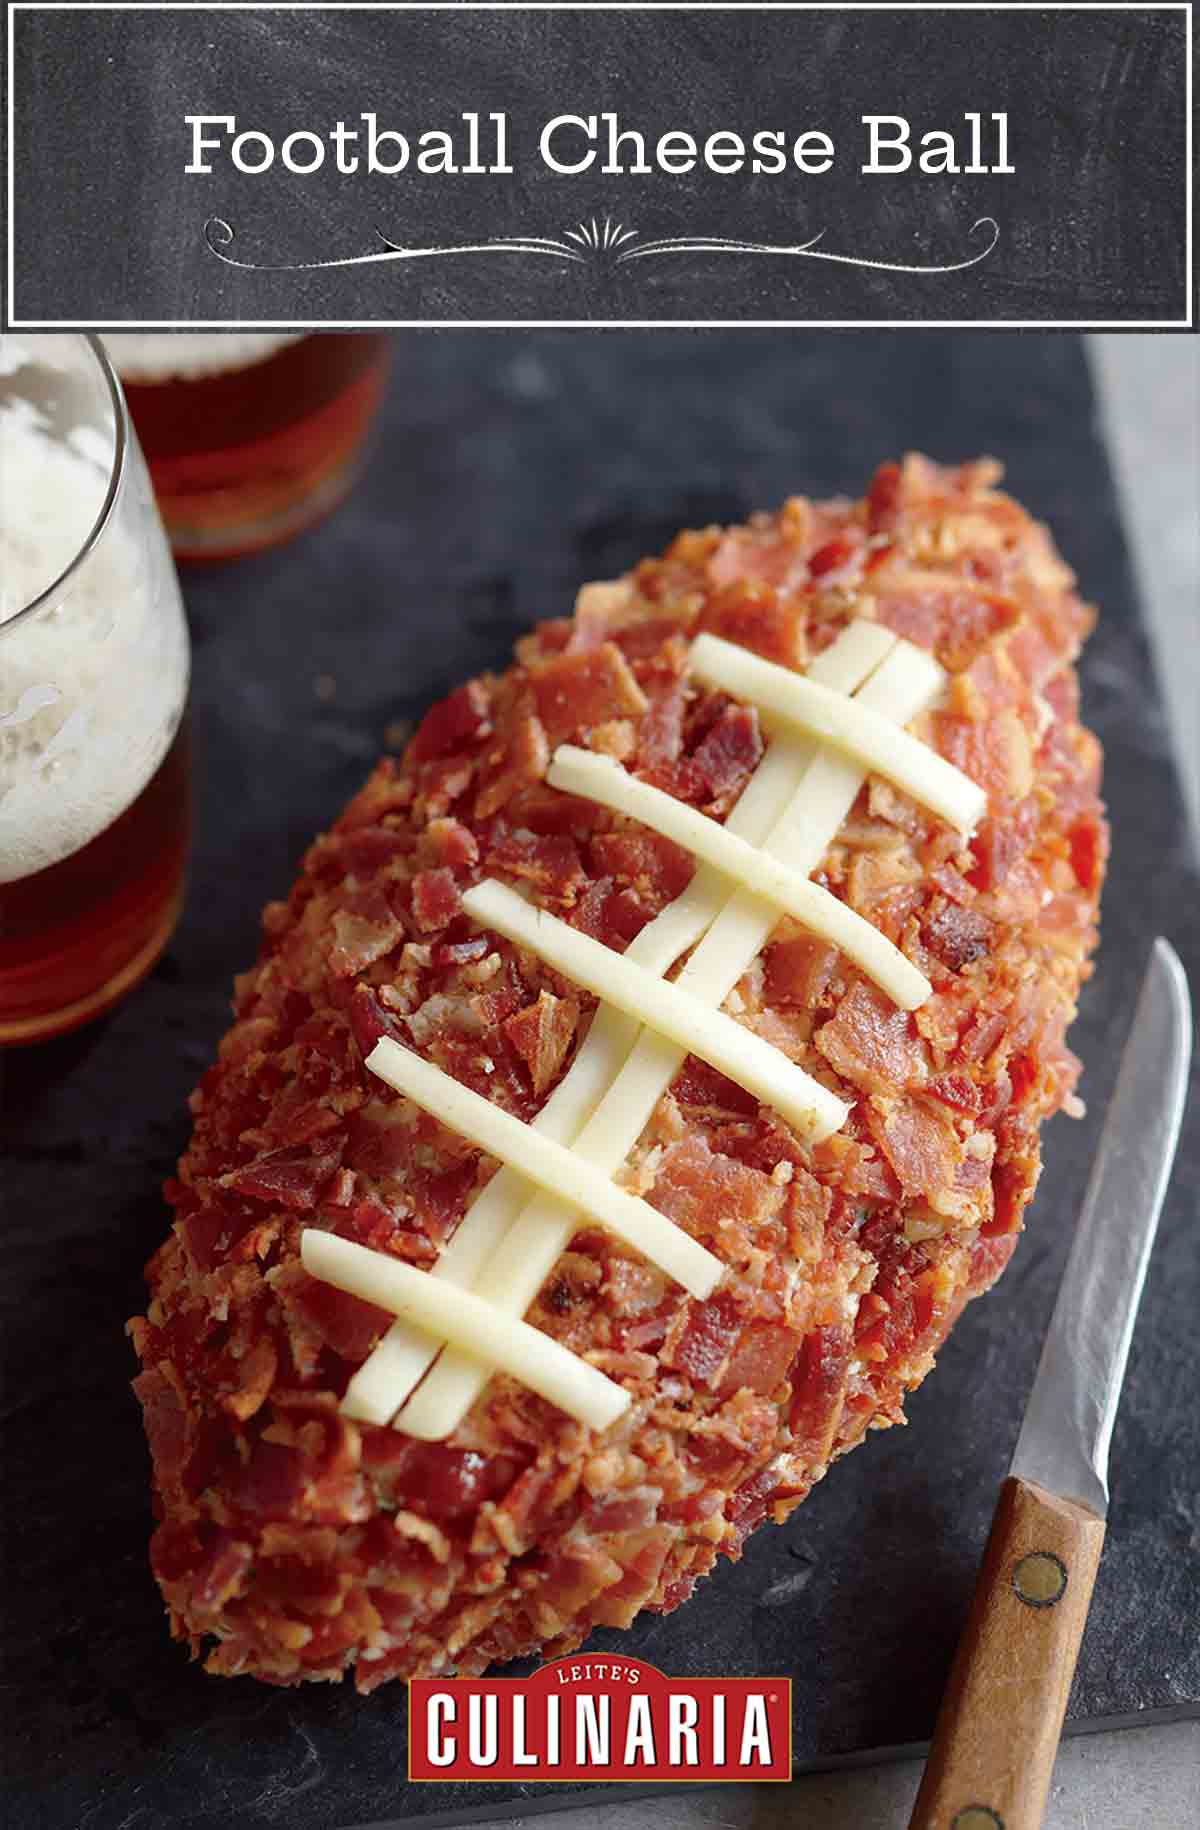 A football cheese ball on a serving board with two glasses of beer and a knife beside it.